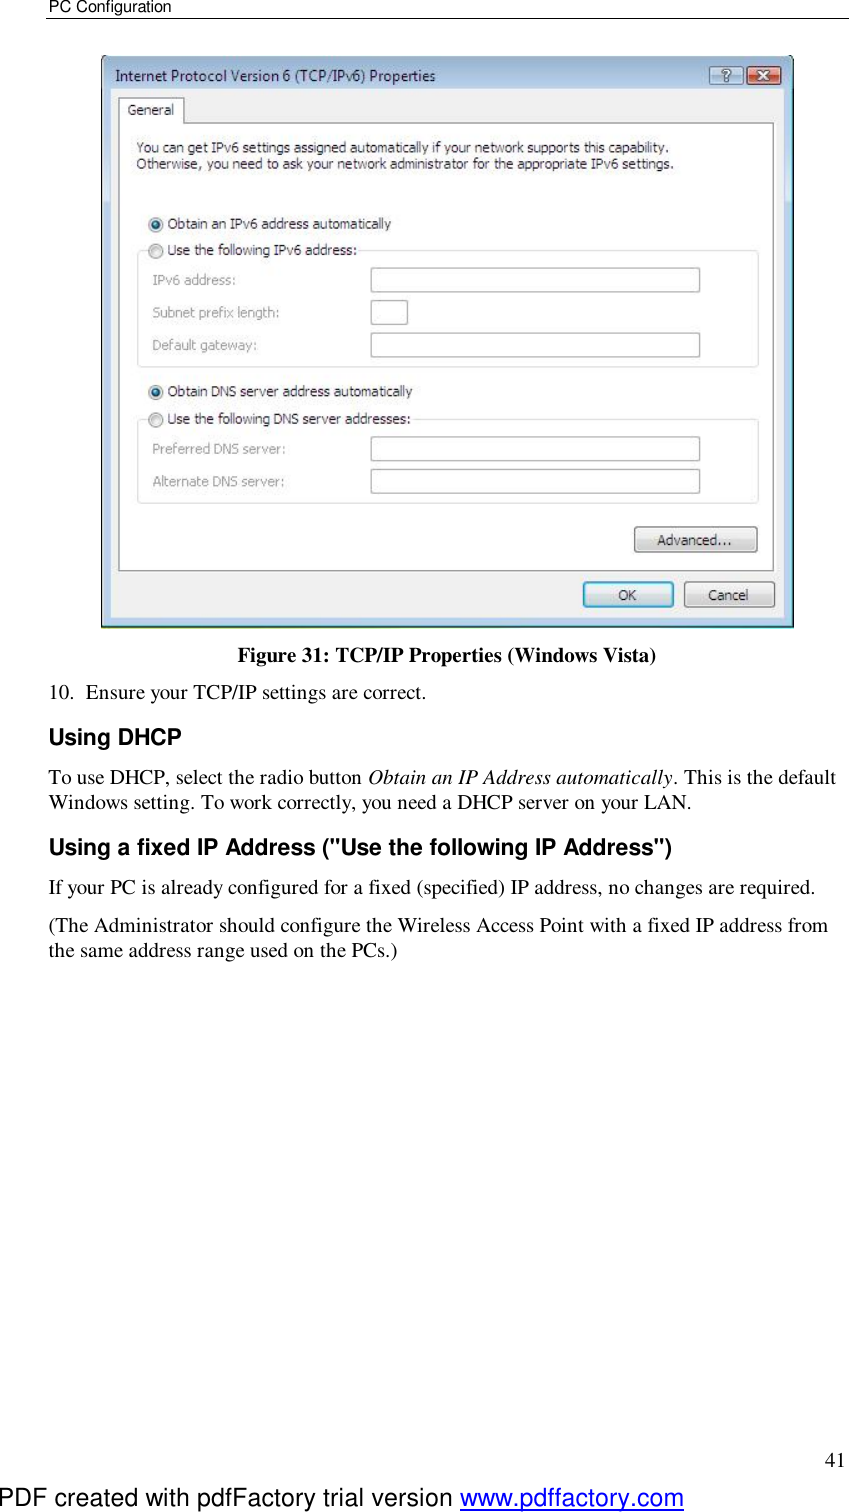 PC Configuration 41  Figure 31: TCP/IP Properties (Windows Vista) 10. Ensure your TCP/IP settings are correct. Using DHCP To use DHCP, select the radio button Obtain an IP Address automatically. This is the default Windows setting. To work correctly, you need a DHCP server on your LAN. Using a fixed IP Address (&quot;Use the following IP Address&quot;) If your PC is already configured for a fixed (specified) IP address, no changes are required. (The Administrator should configure the Wireless Access Point with a fixed IP address from the same address range used on the PCs.)    PDF created with pdfFactory trial version www.pdffactory.com